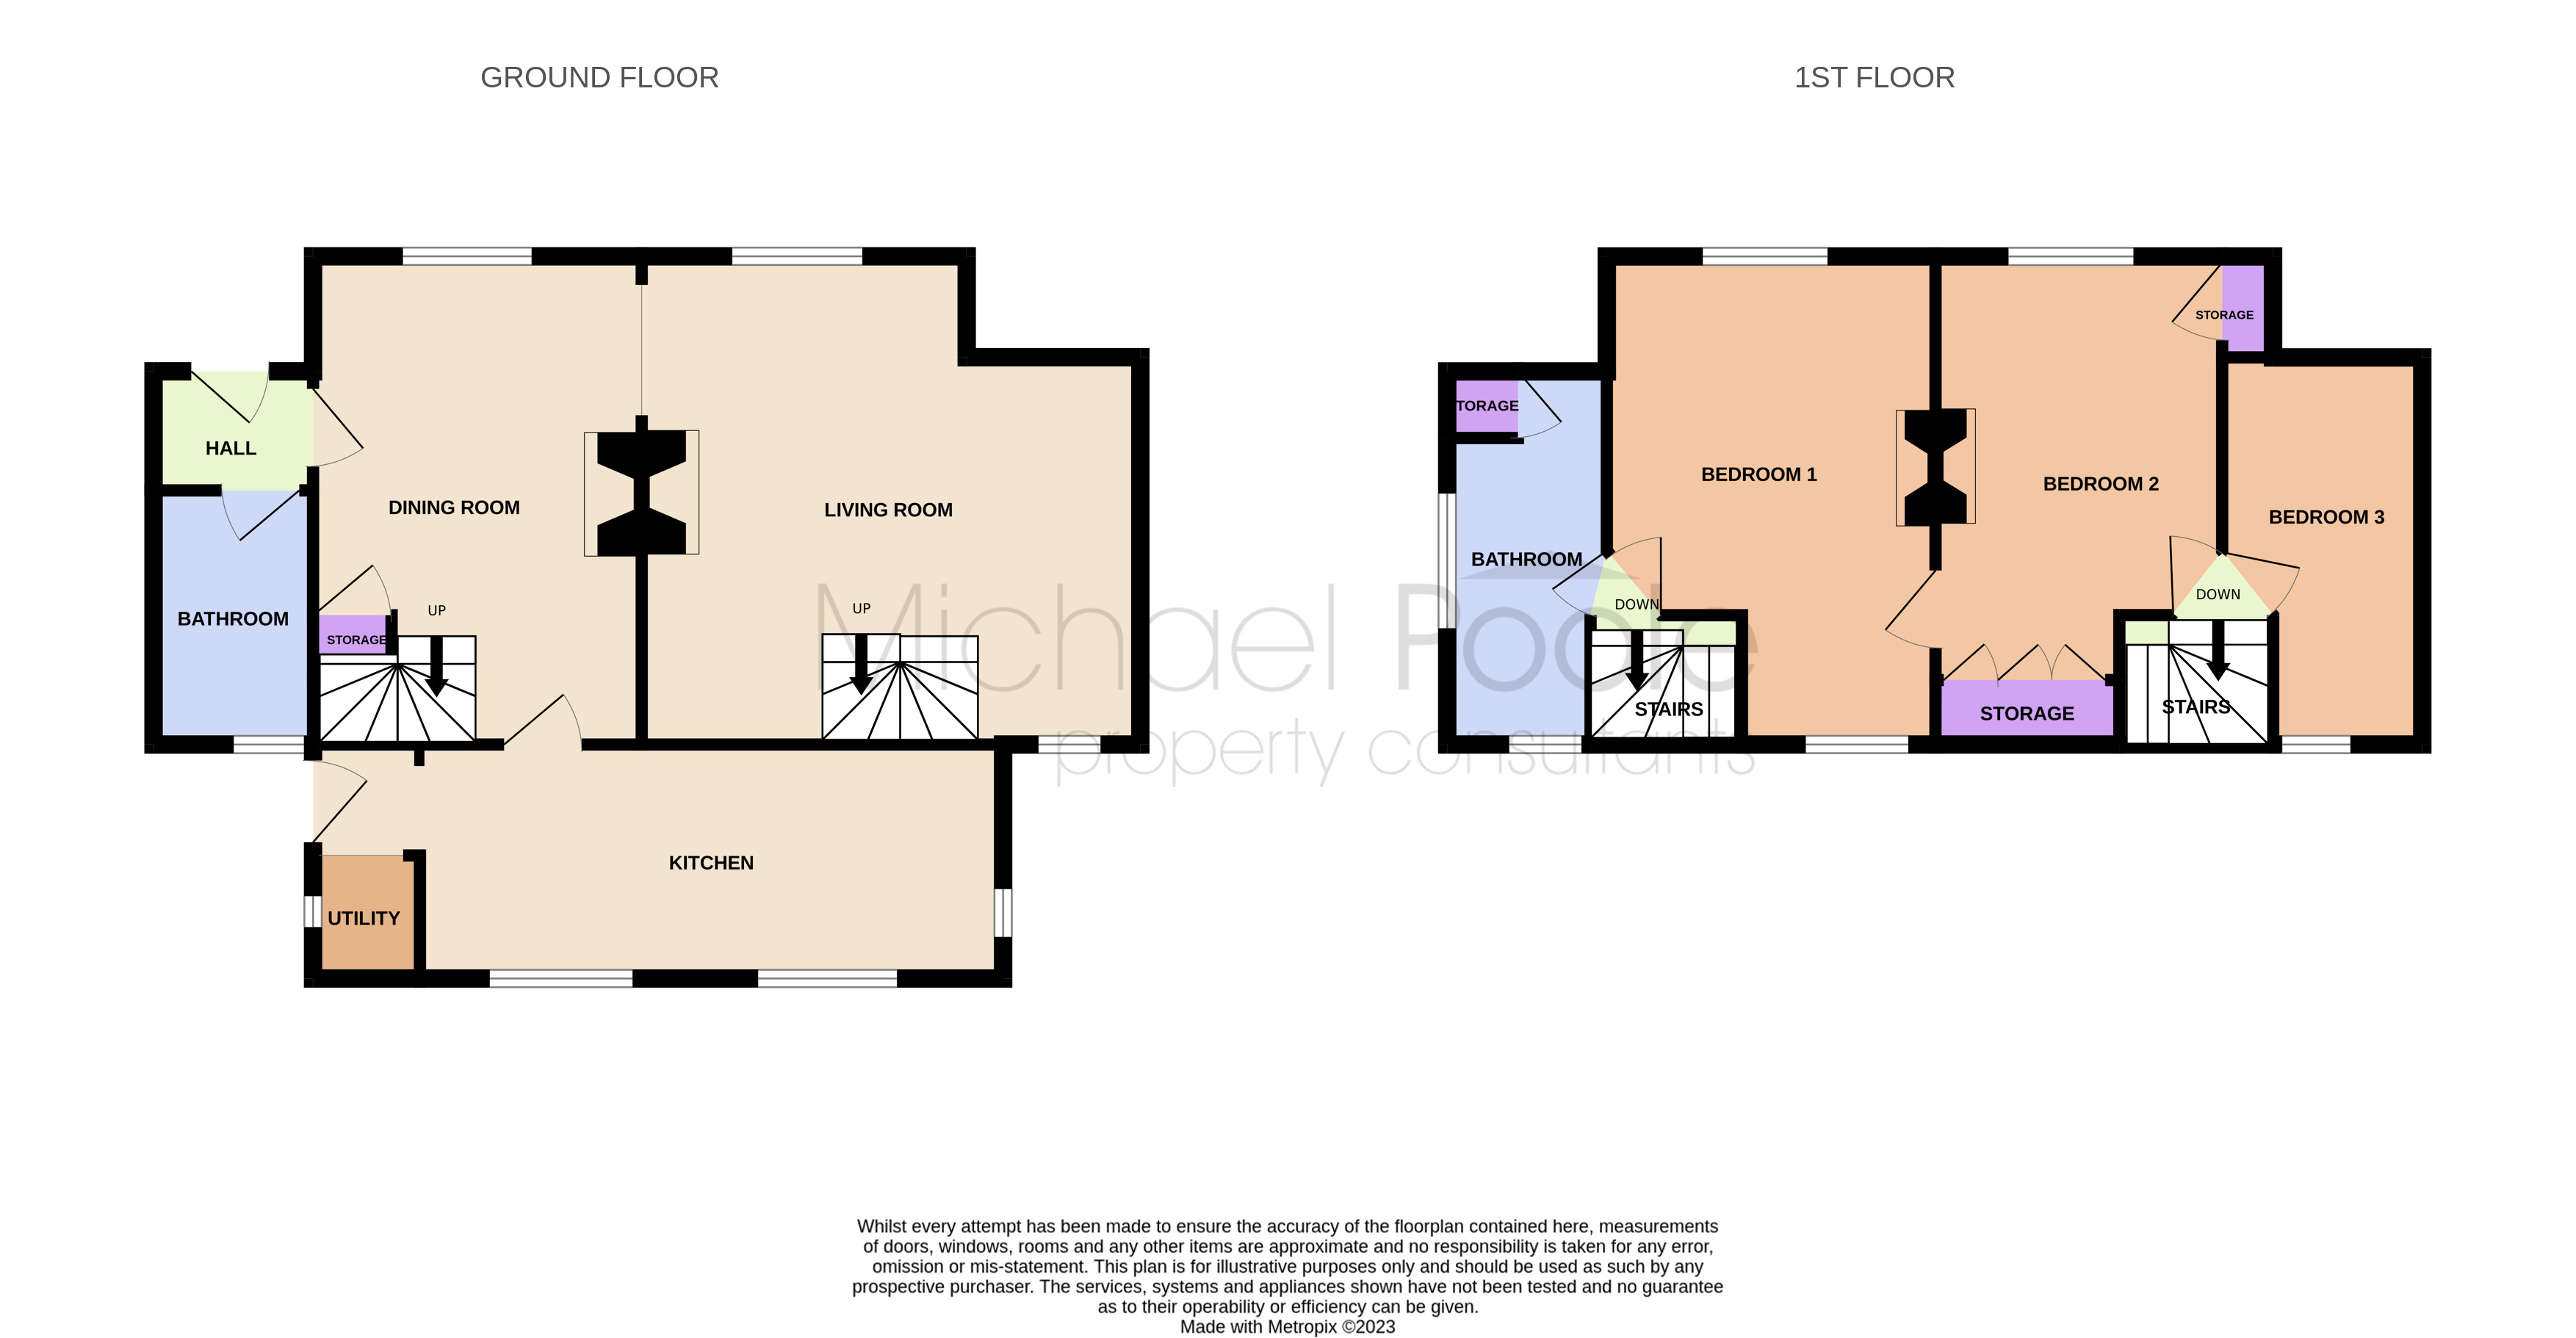 3 bed house for sale in Wilton Village, Redcar - Property floorplan